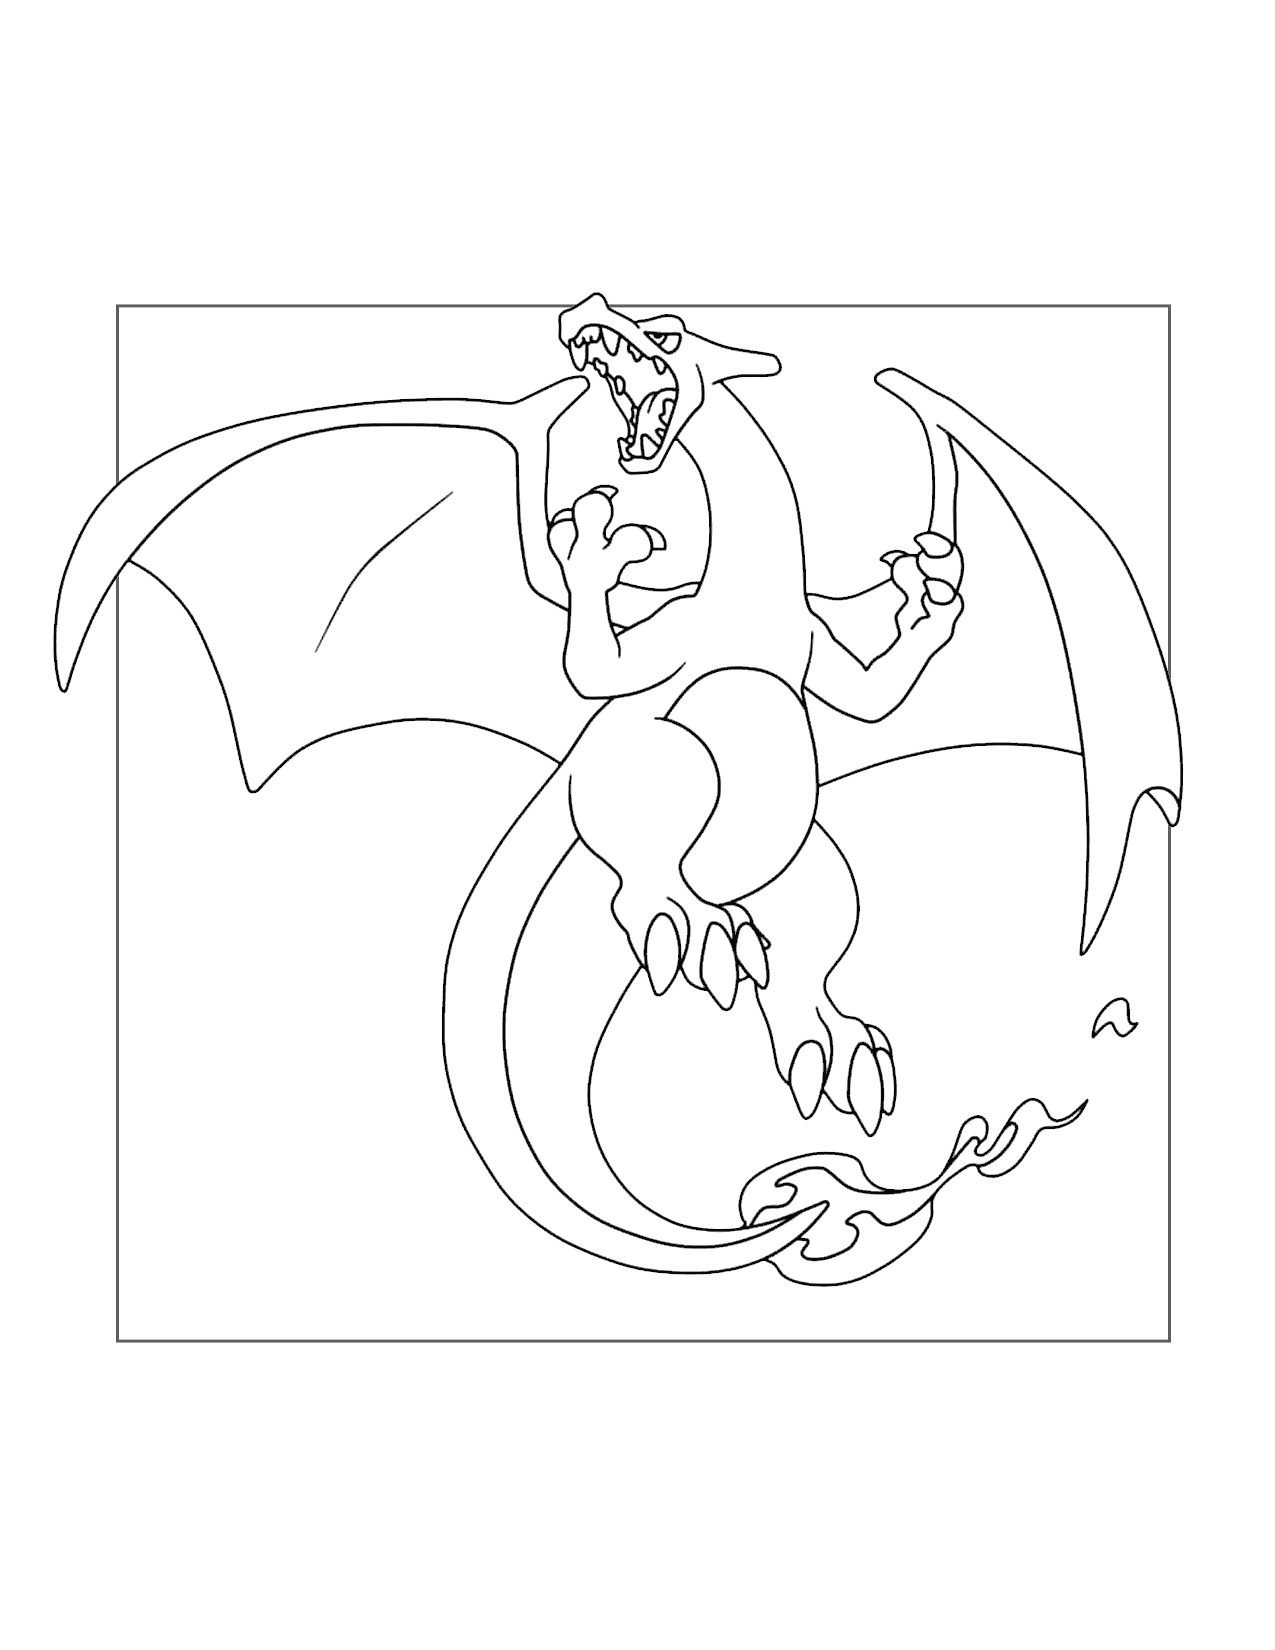 Charizard Flying High Coloring Page